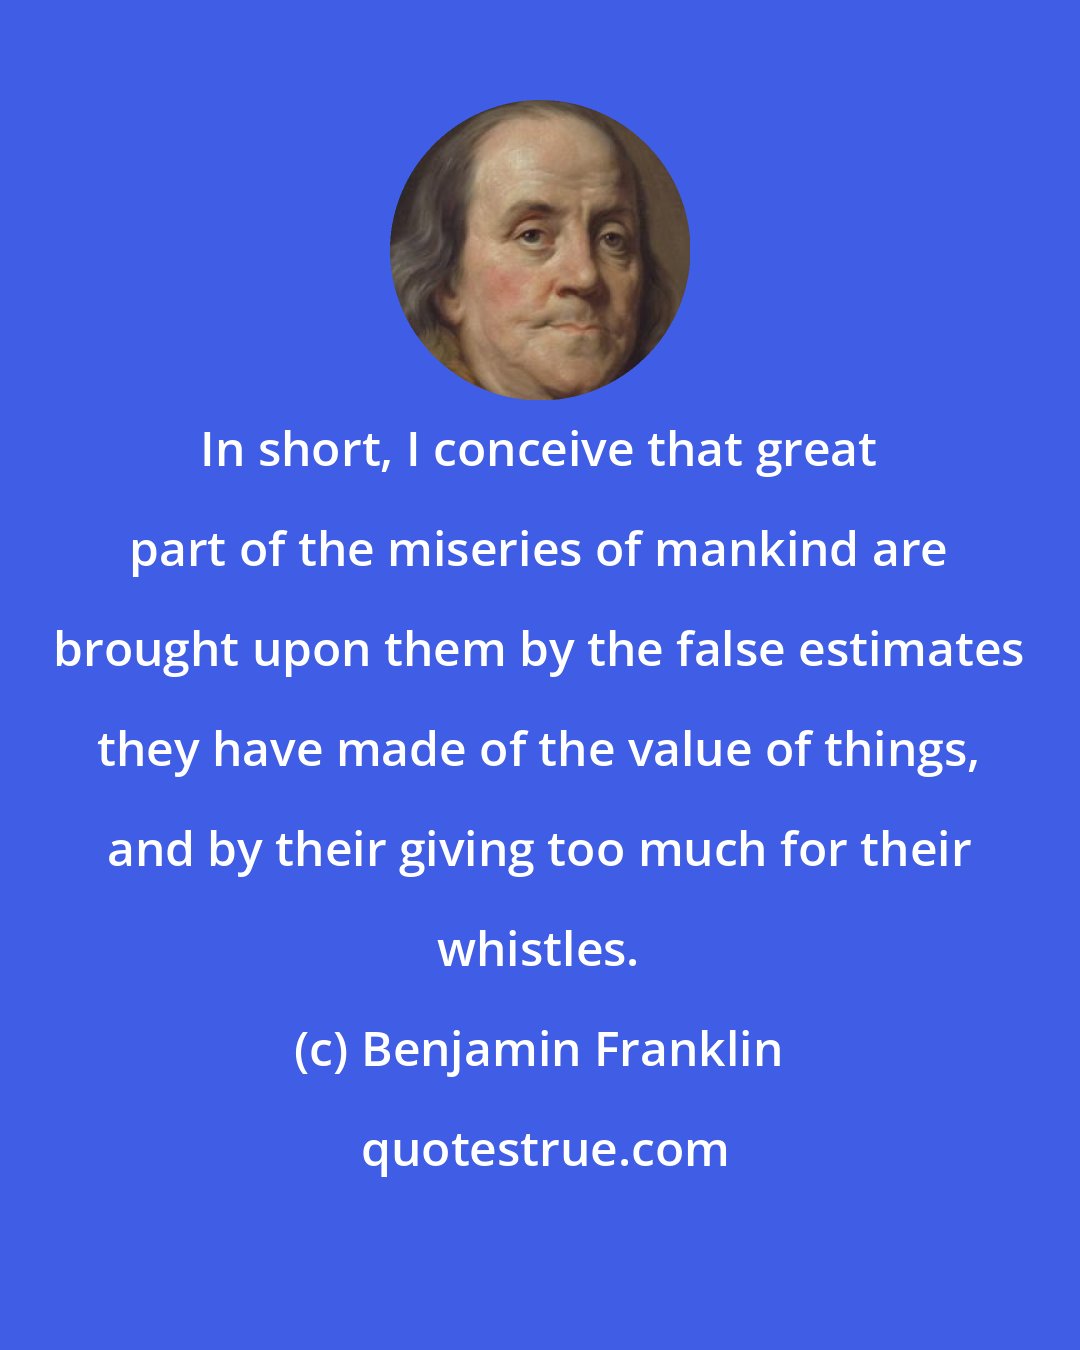 Benjamin Franklin: In short, I conceive that great part of the miseries of mankind are brought upon them by the false estimates they have made of the value of things, and by their giving too much for their whistles.